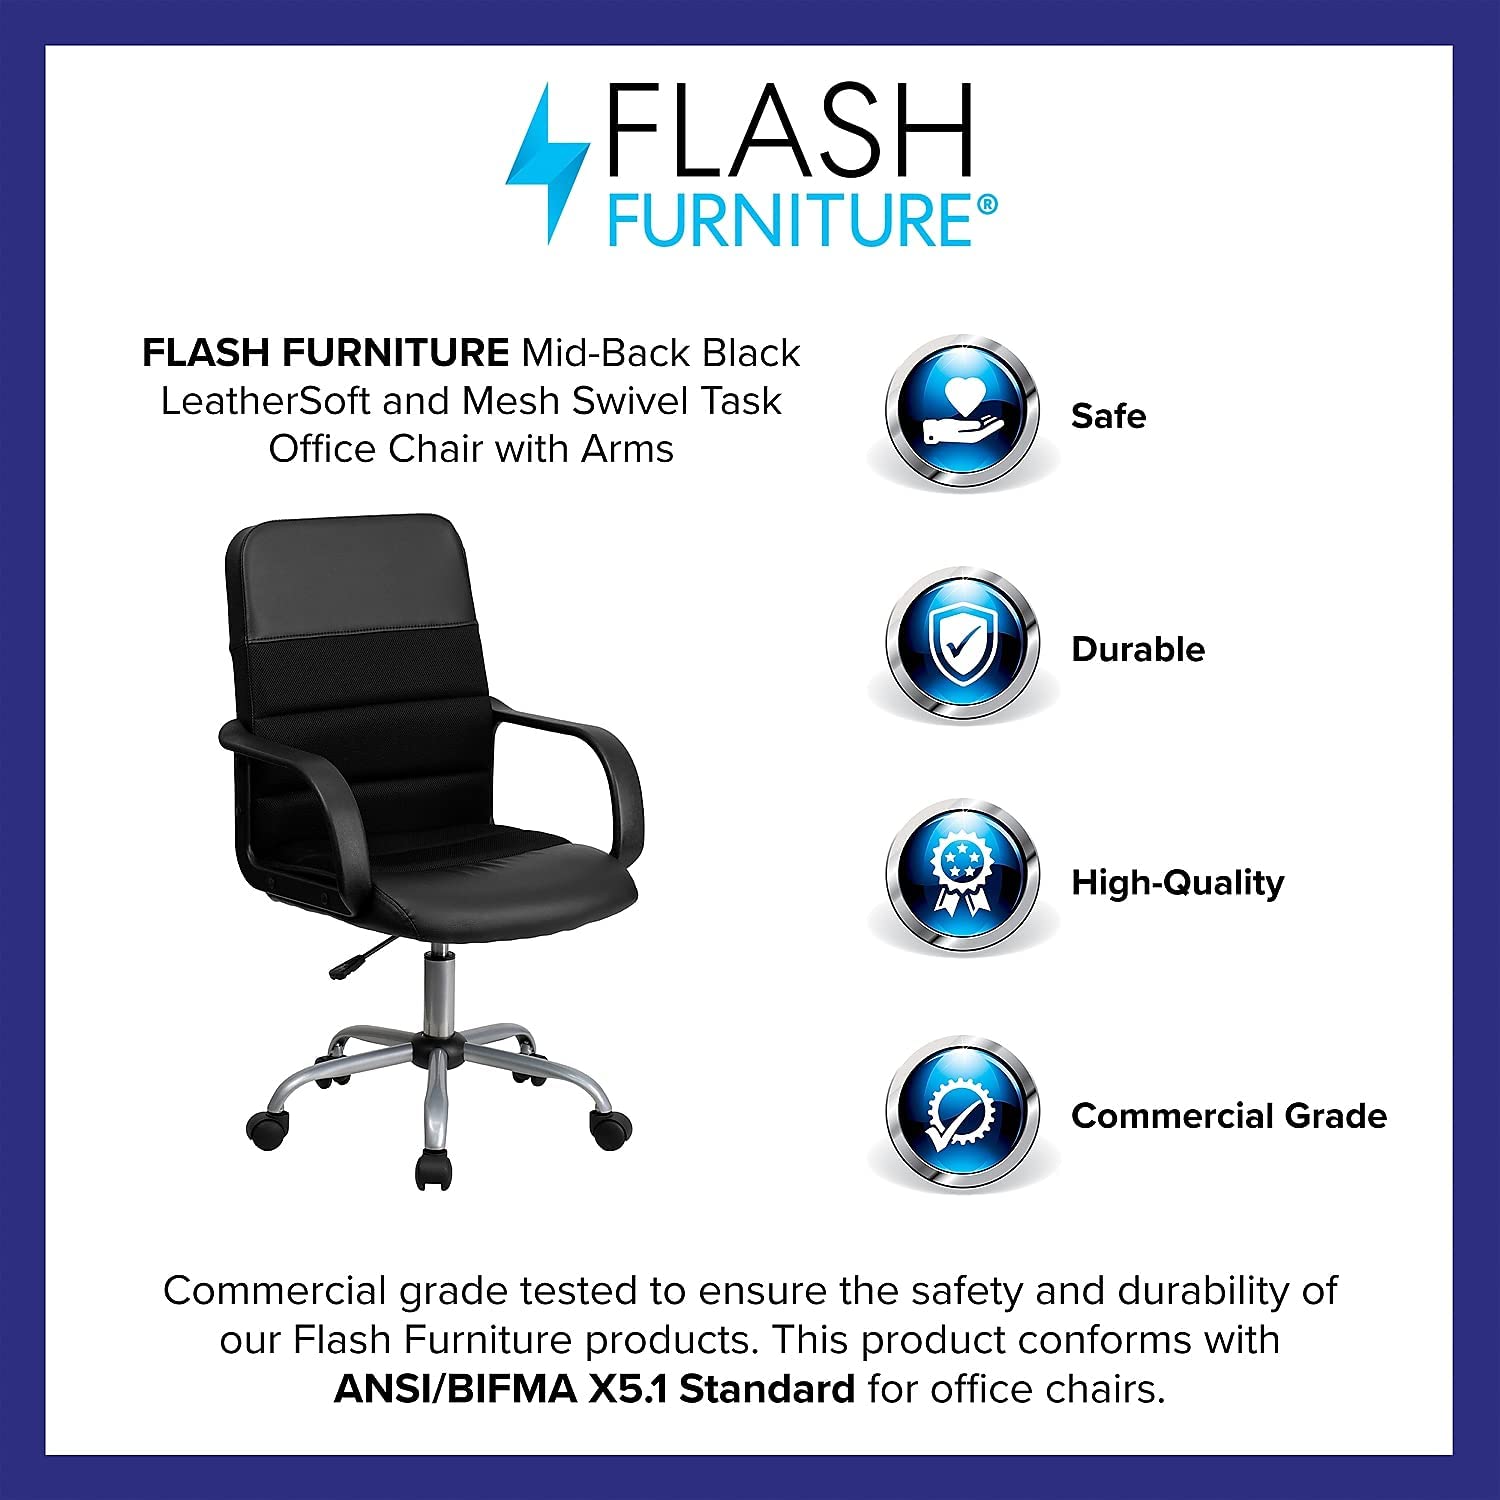 Flash Furniture Mid-Back Black LeatherSoft and Mesh Swivel Task Office Chair with Arms